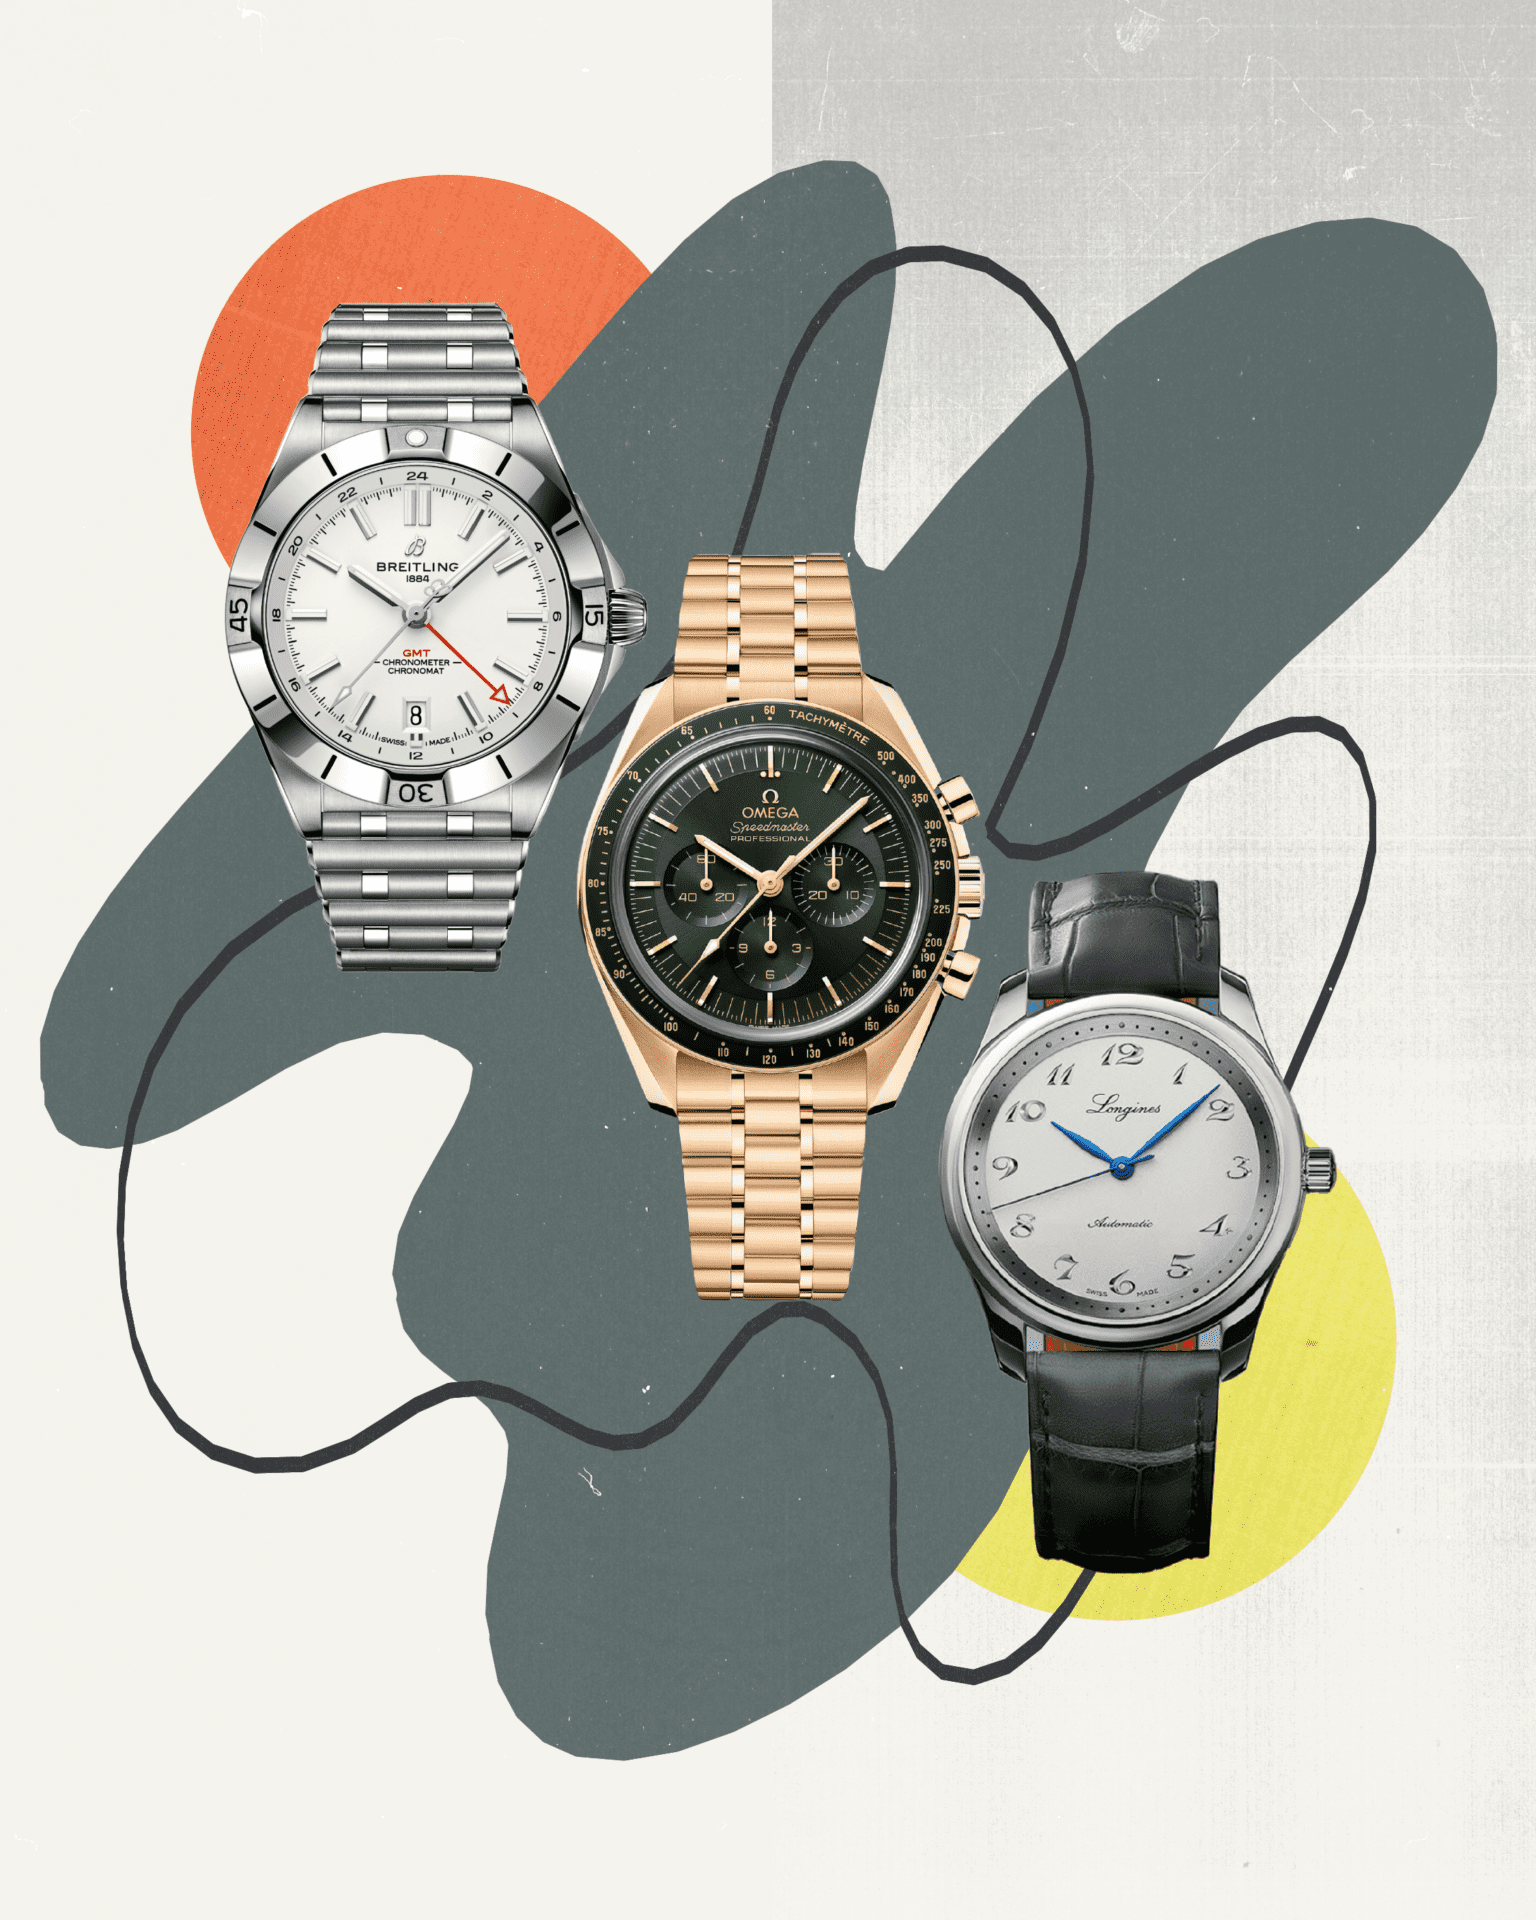 The ROADBOOK festive gift guide | Longines, Omega and Breitling watches against a collage backdroup